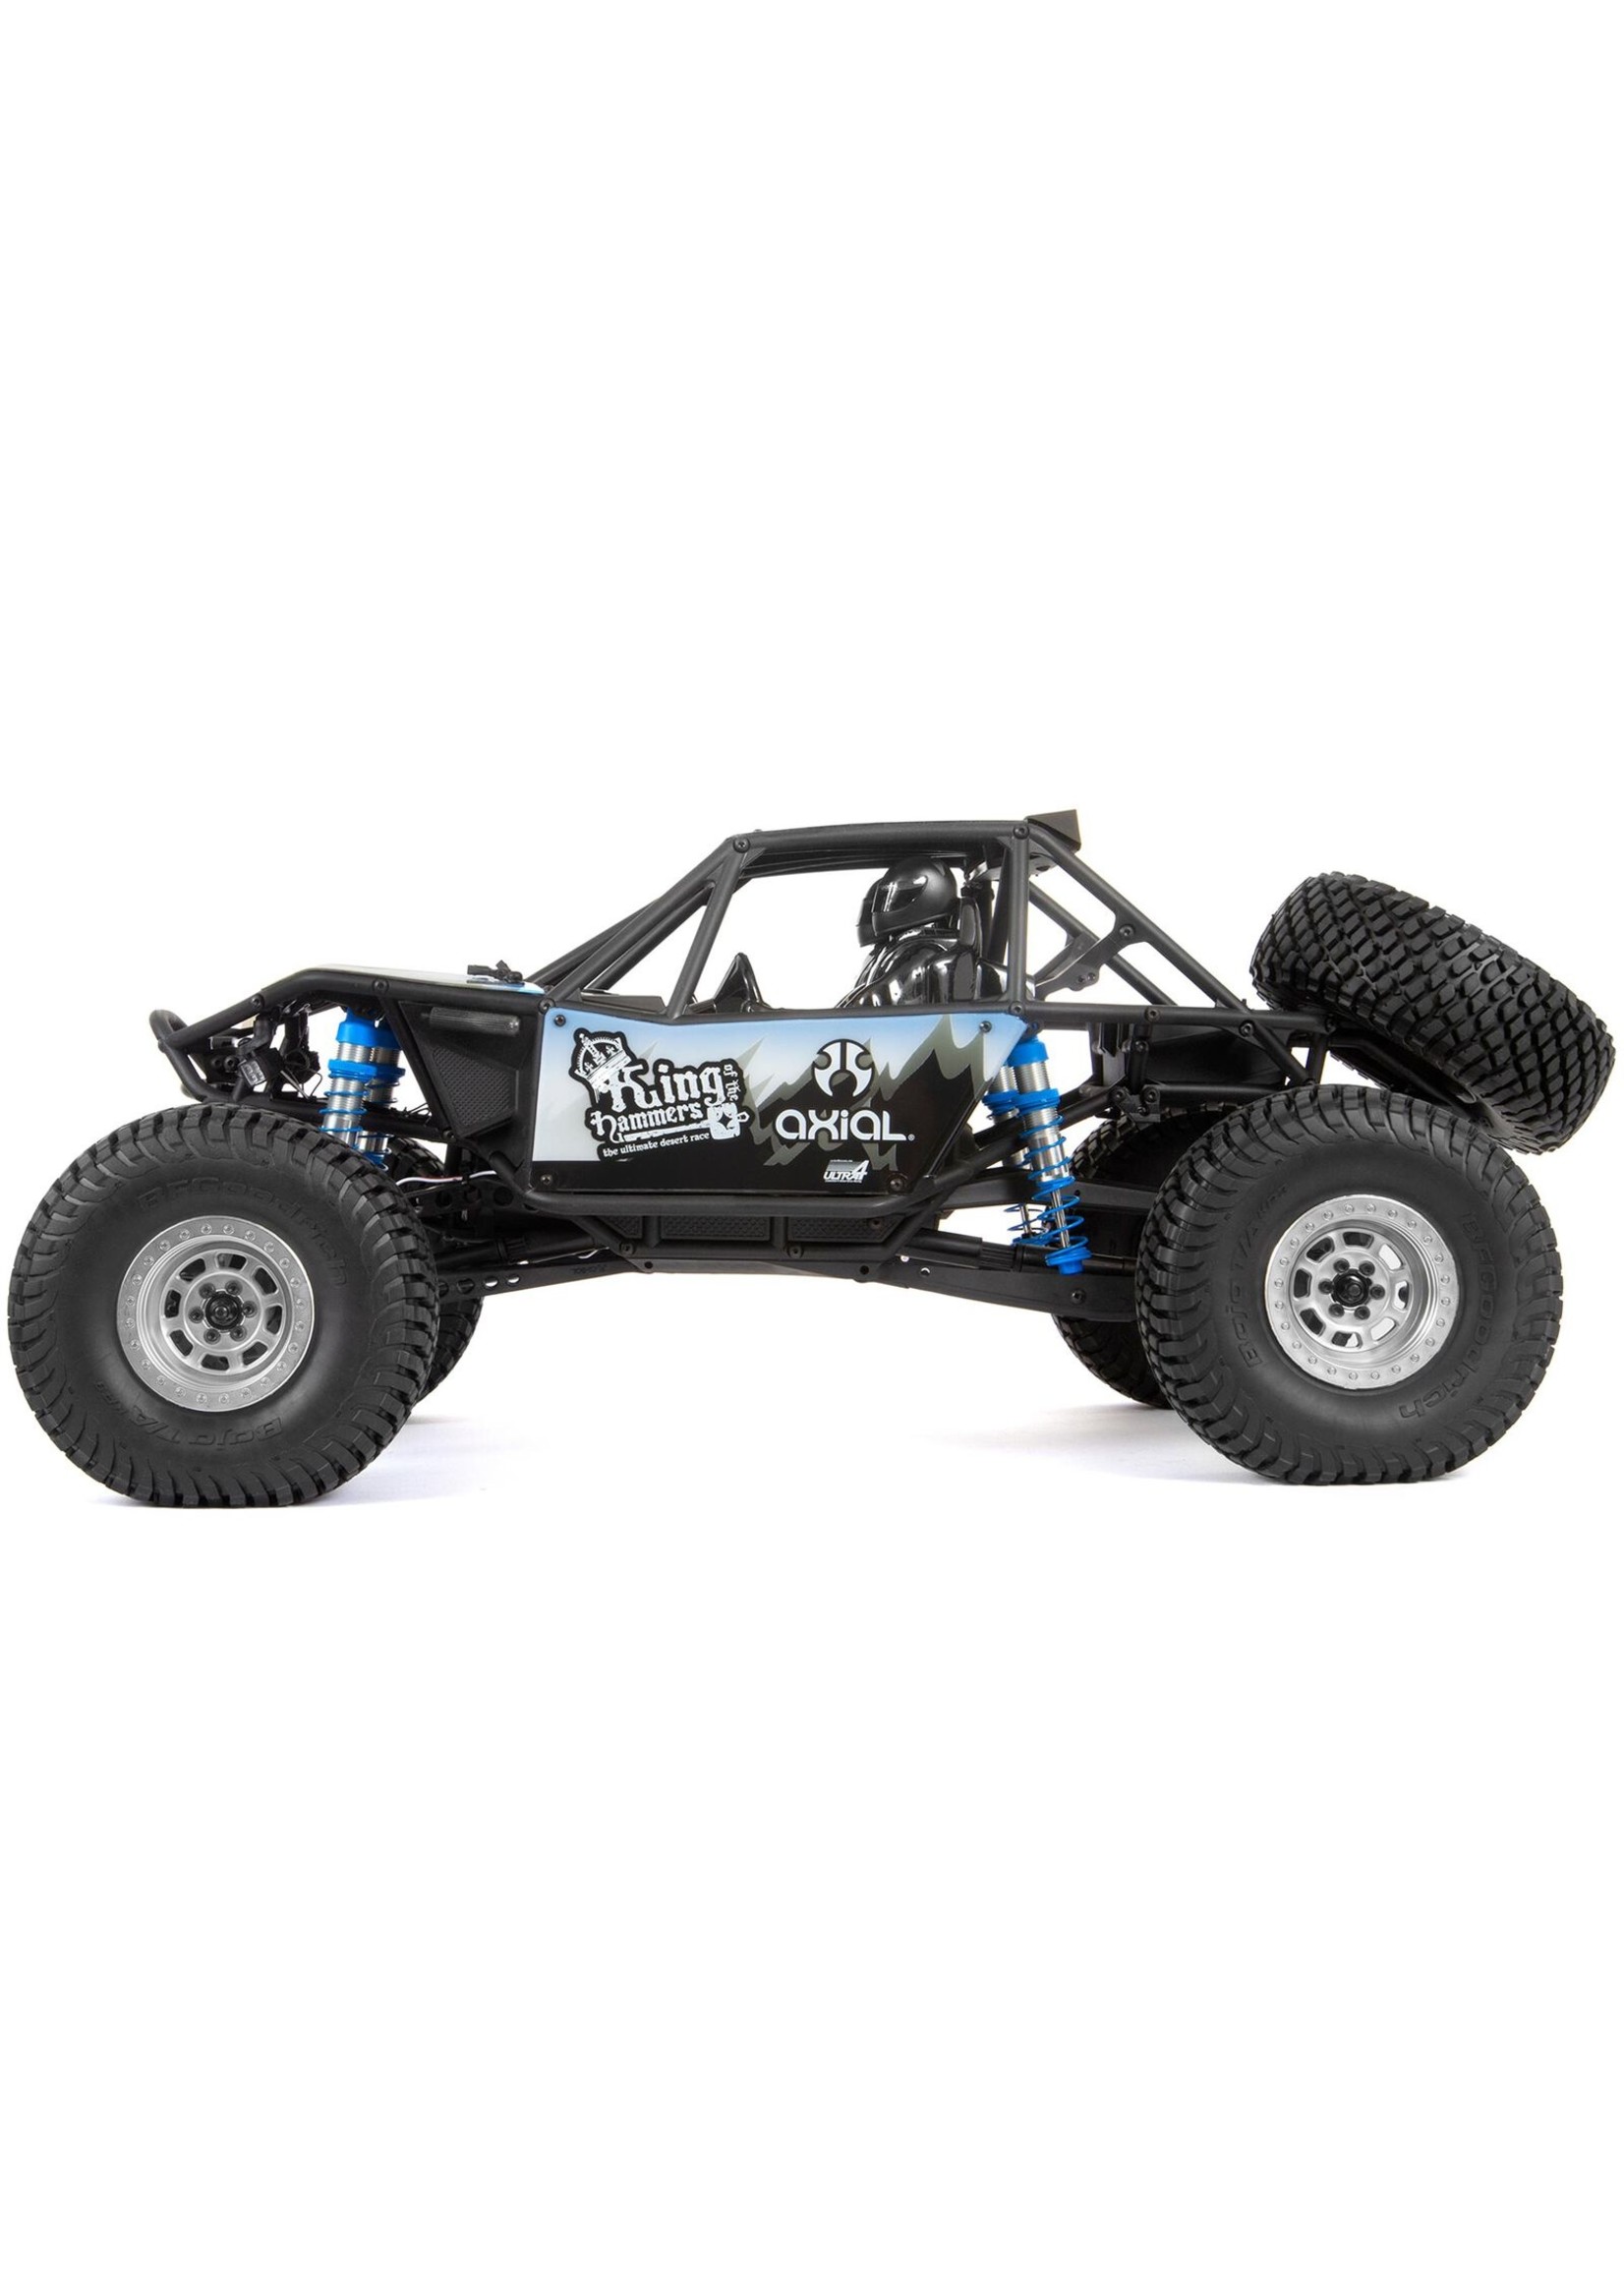 Axial 03013 RR10 Bomber KOH Limited Edition - Hub Hobby